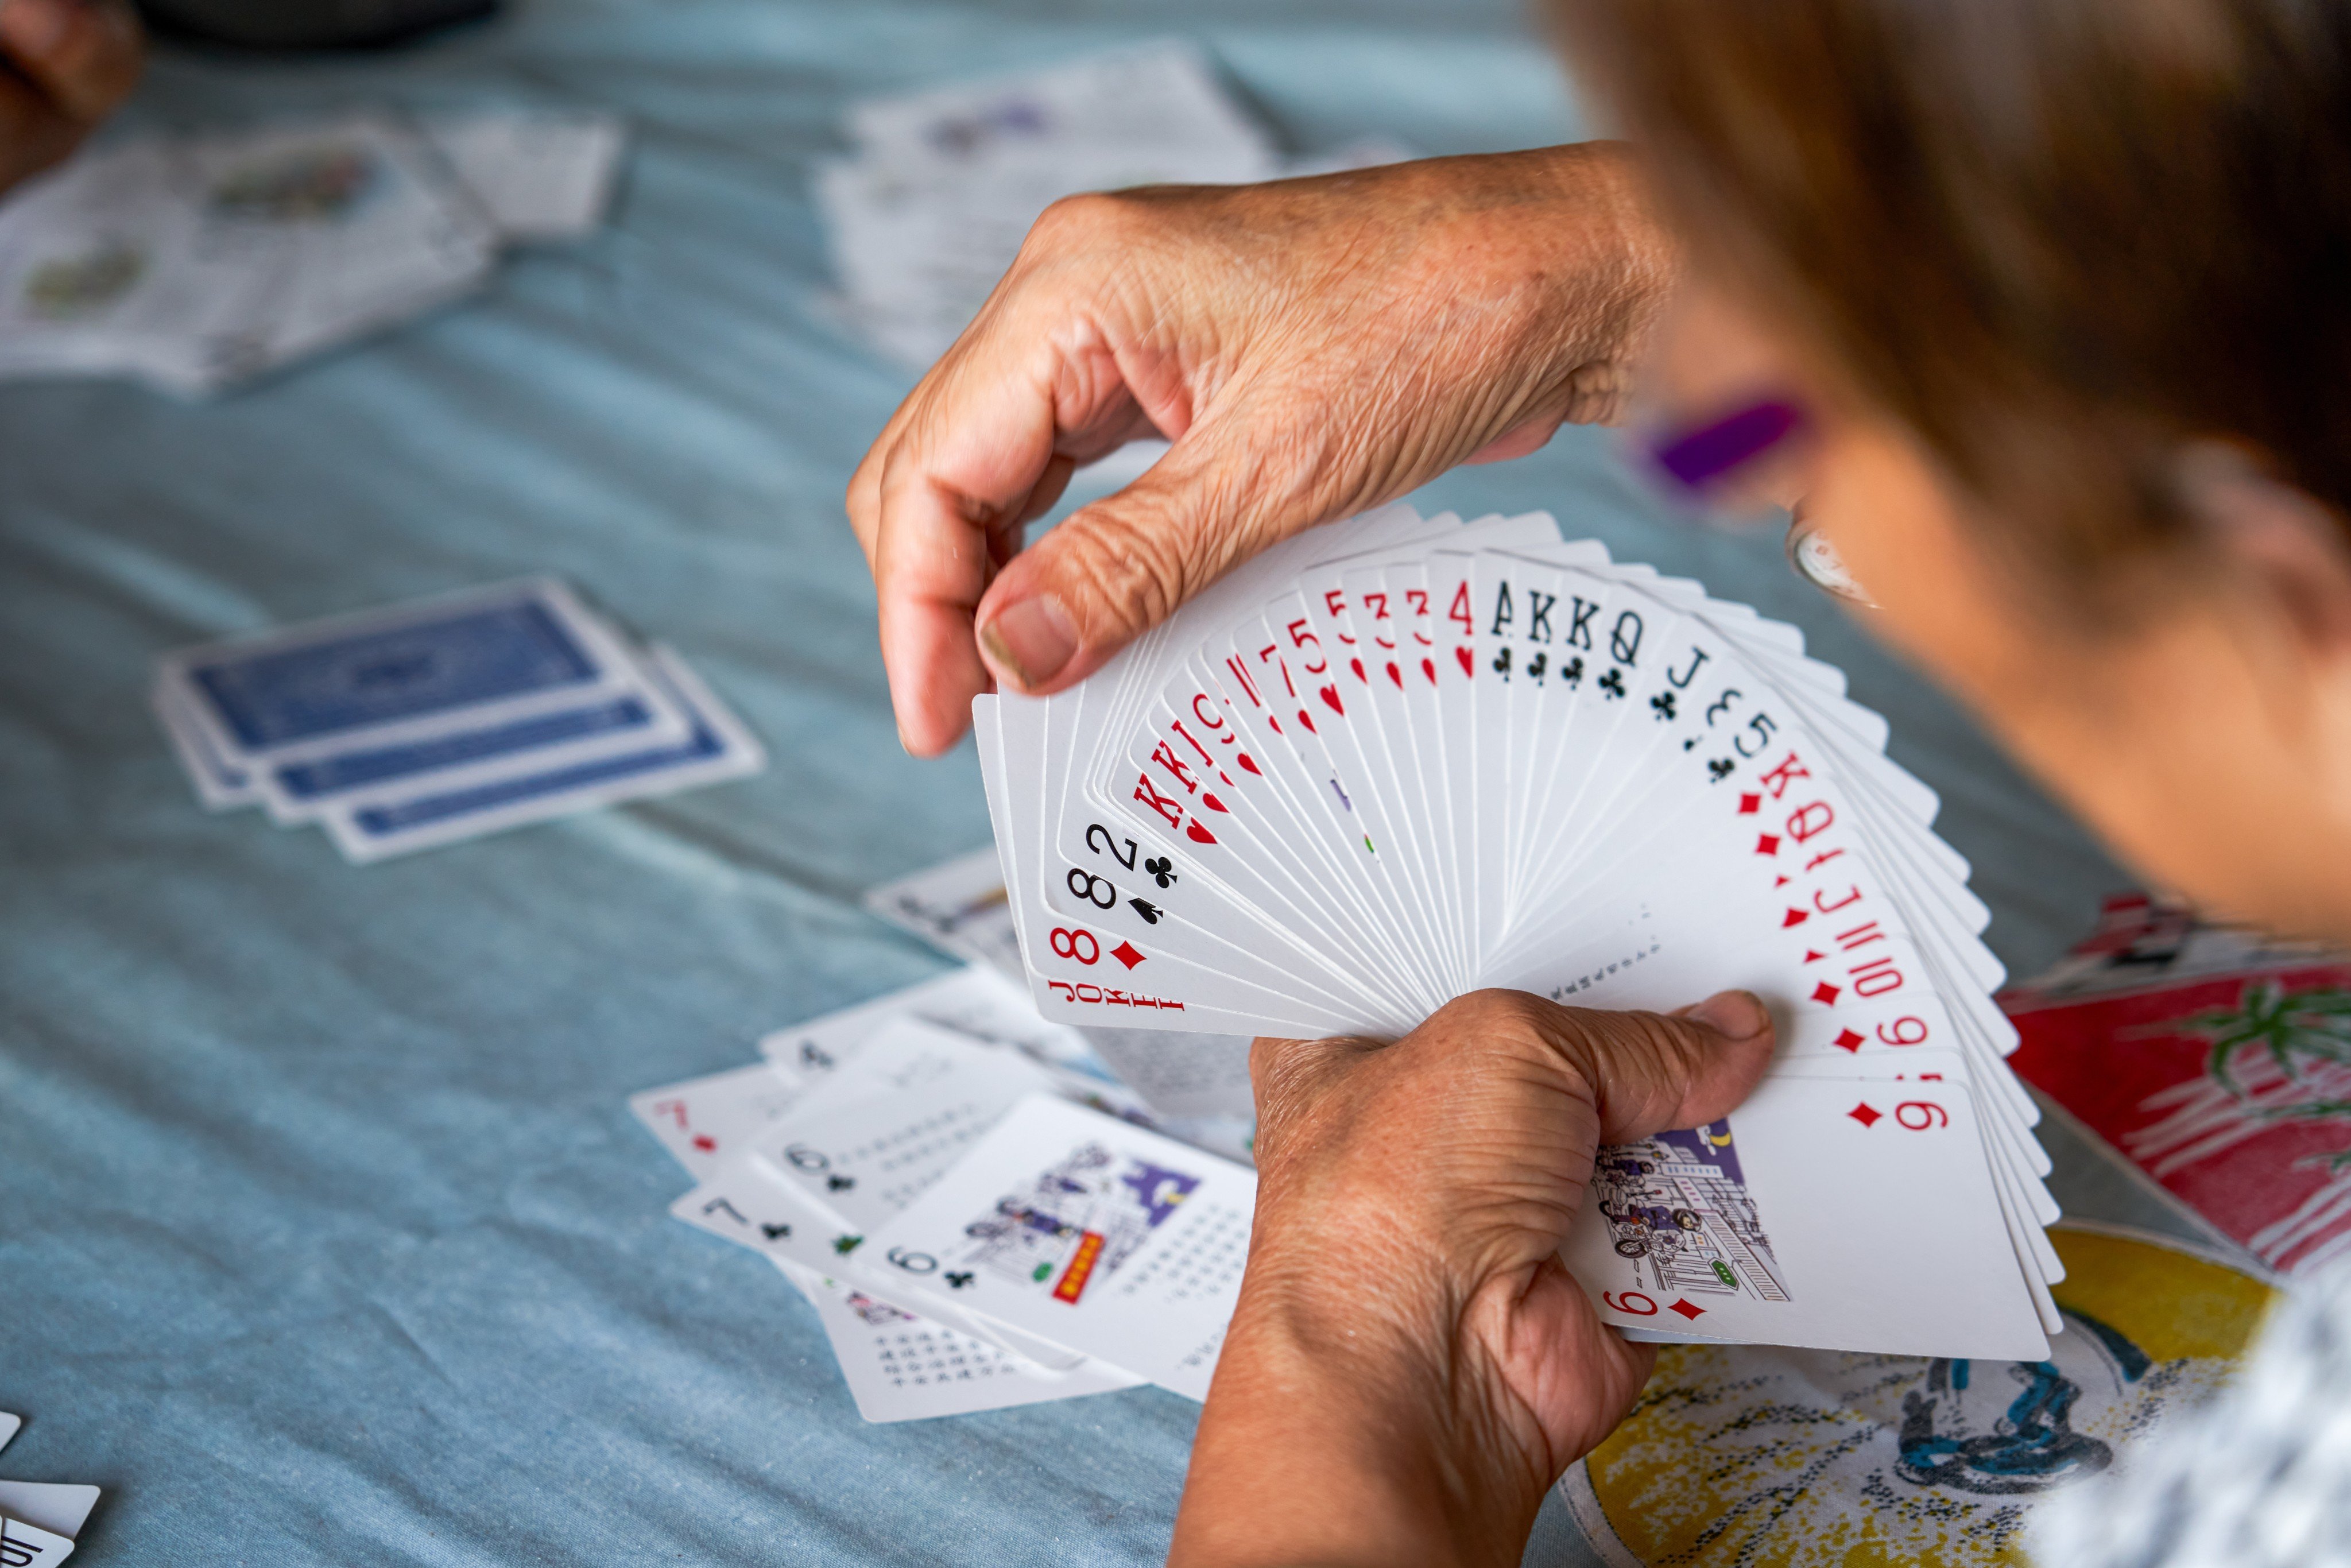 The card game guandan has become a staple of after-work gatherings in China among party officials, sources said. Photo: Shutterstock